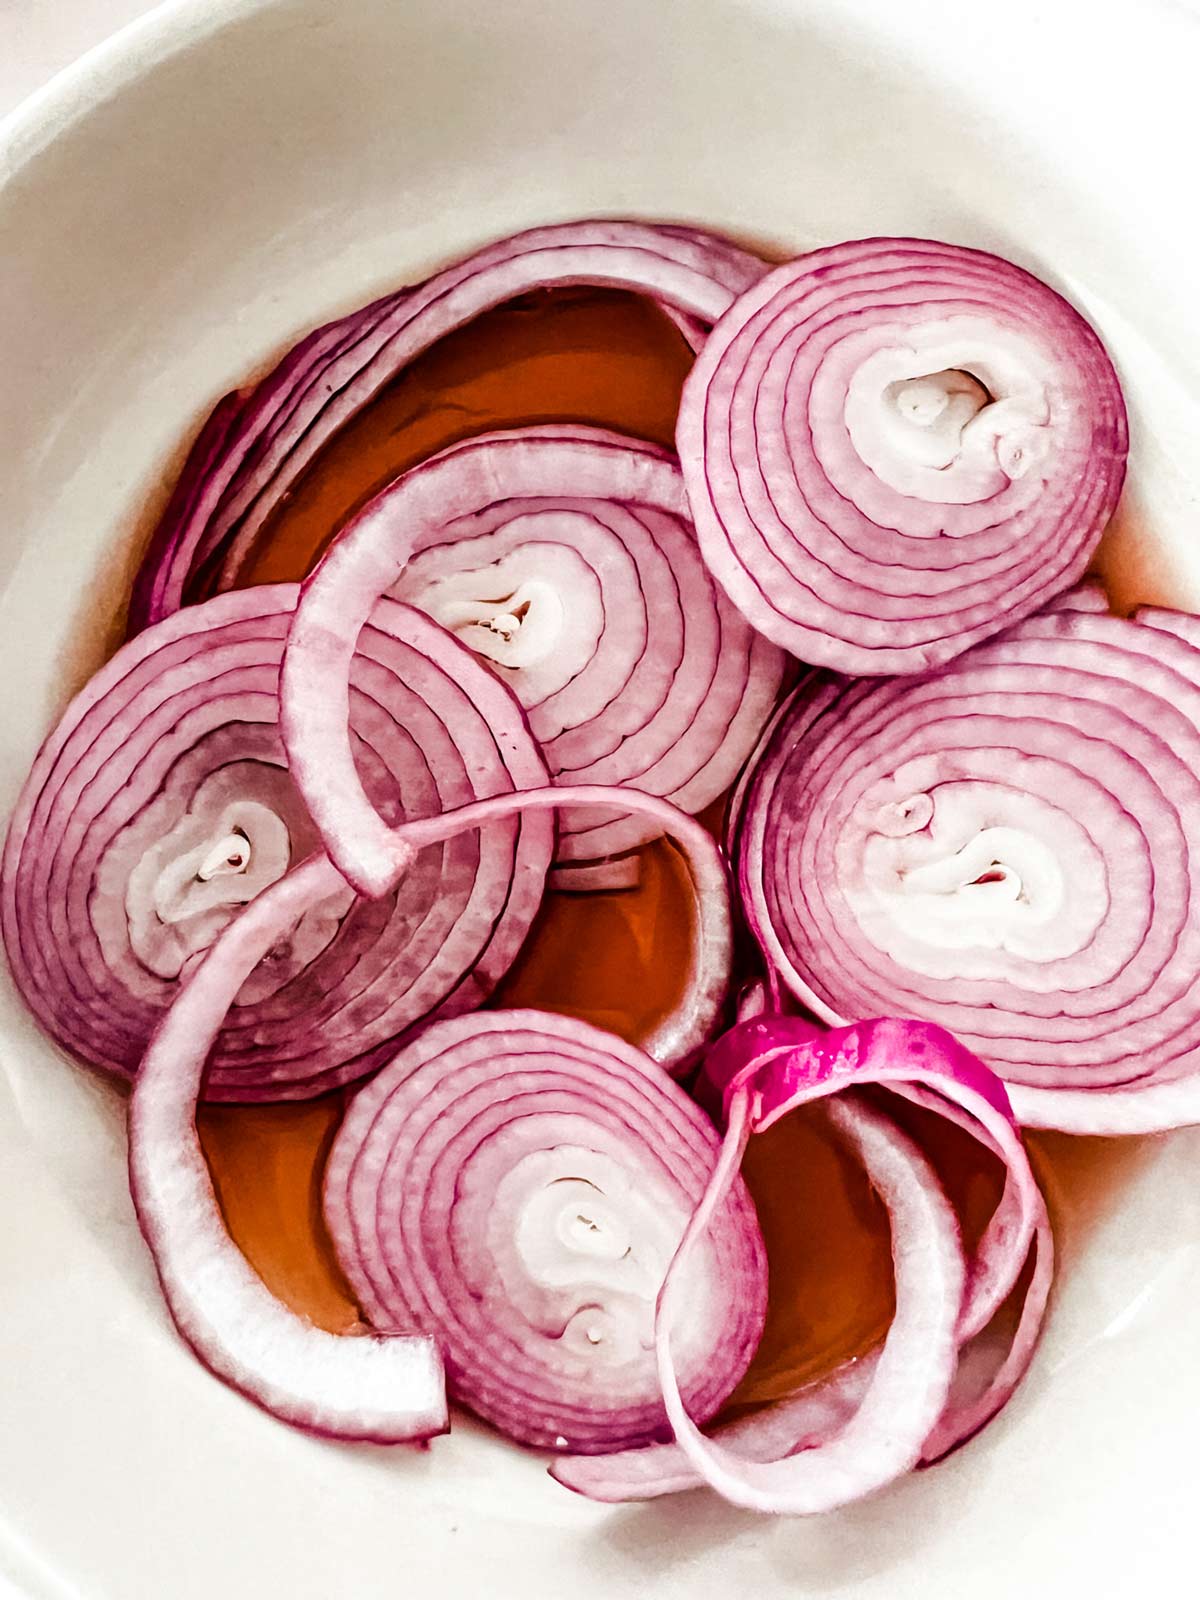 Sliced red onion marinating in red wine vinegar.